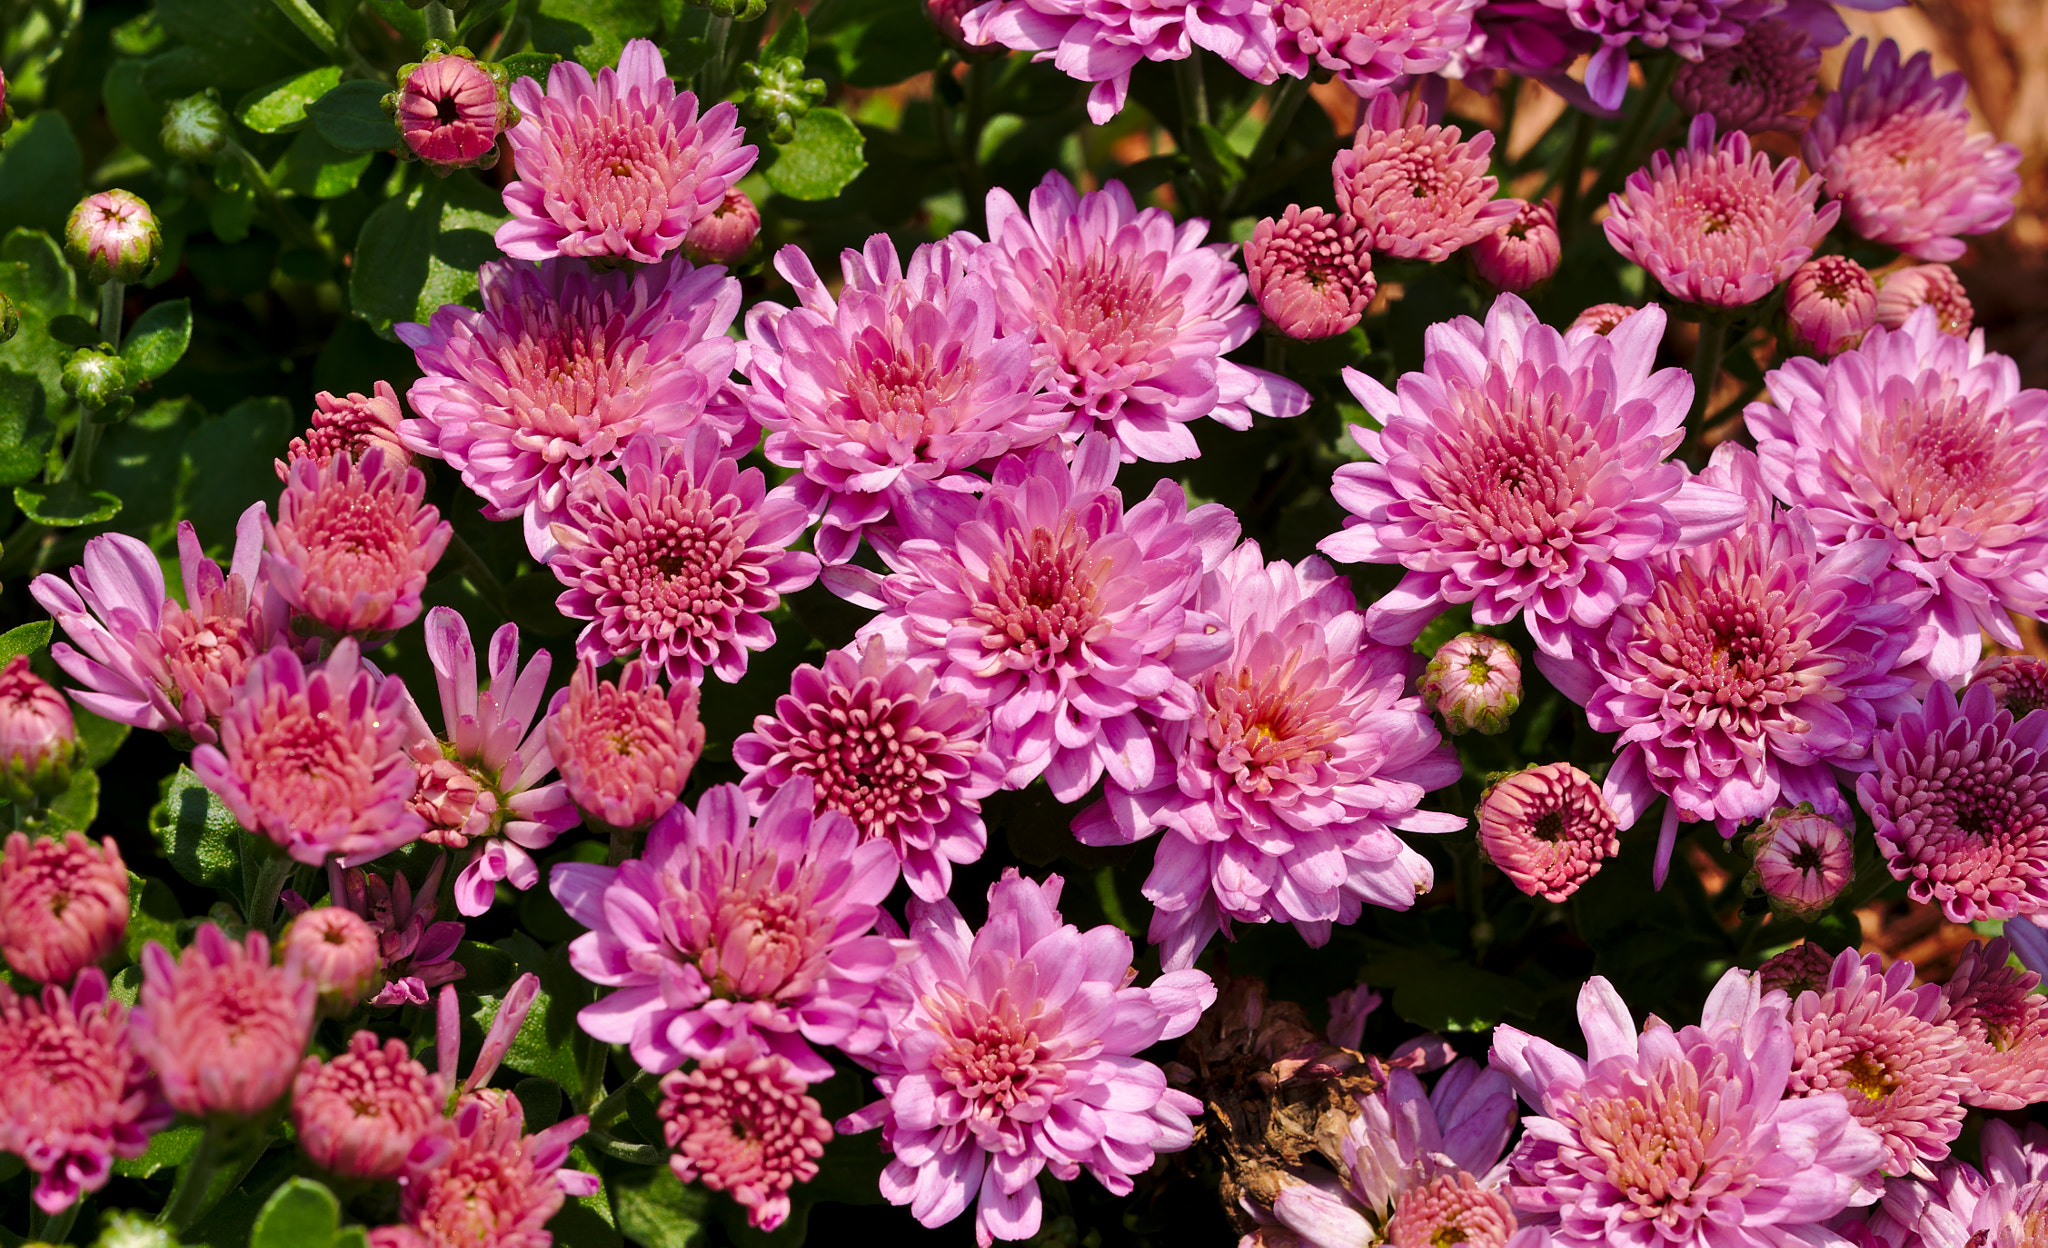 ZEISS Otus 85mm F1.4 sample photo. A cluster of pink mum / chrysanthemum photography